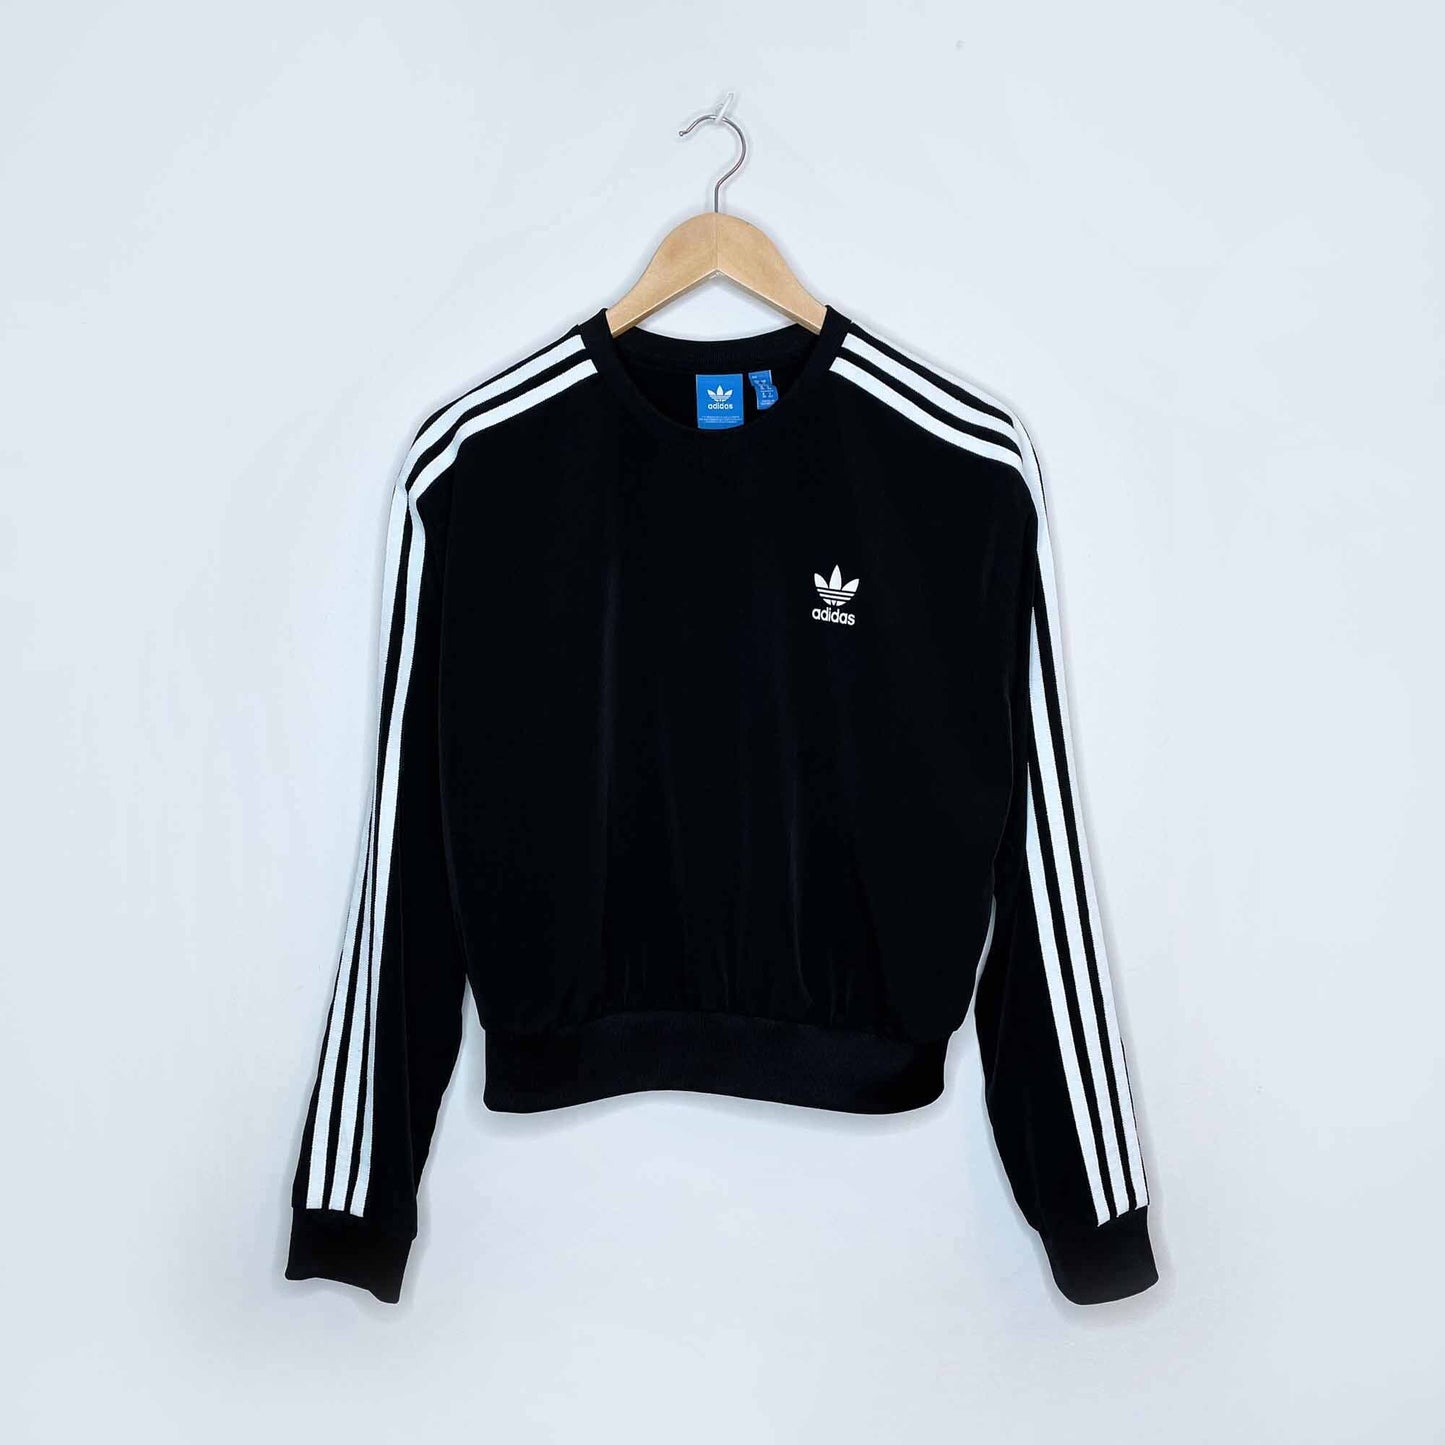 adidas 3-stripes long sleeve top - size small